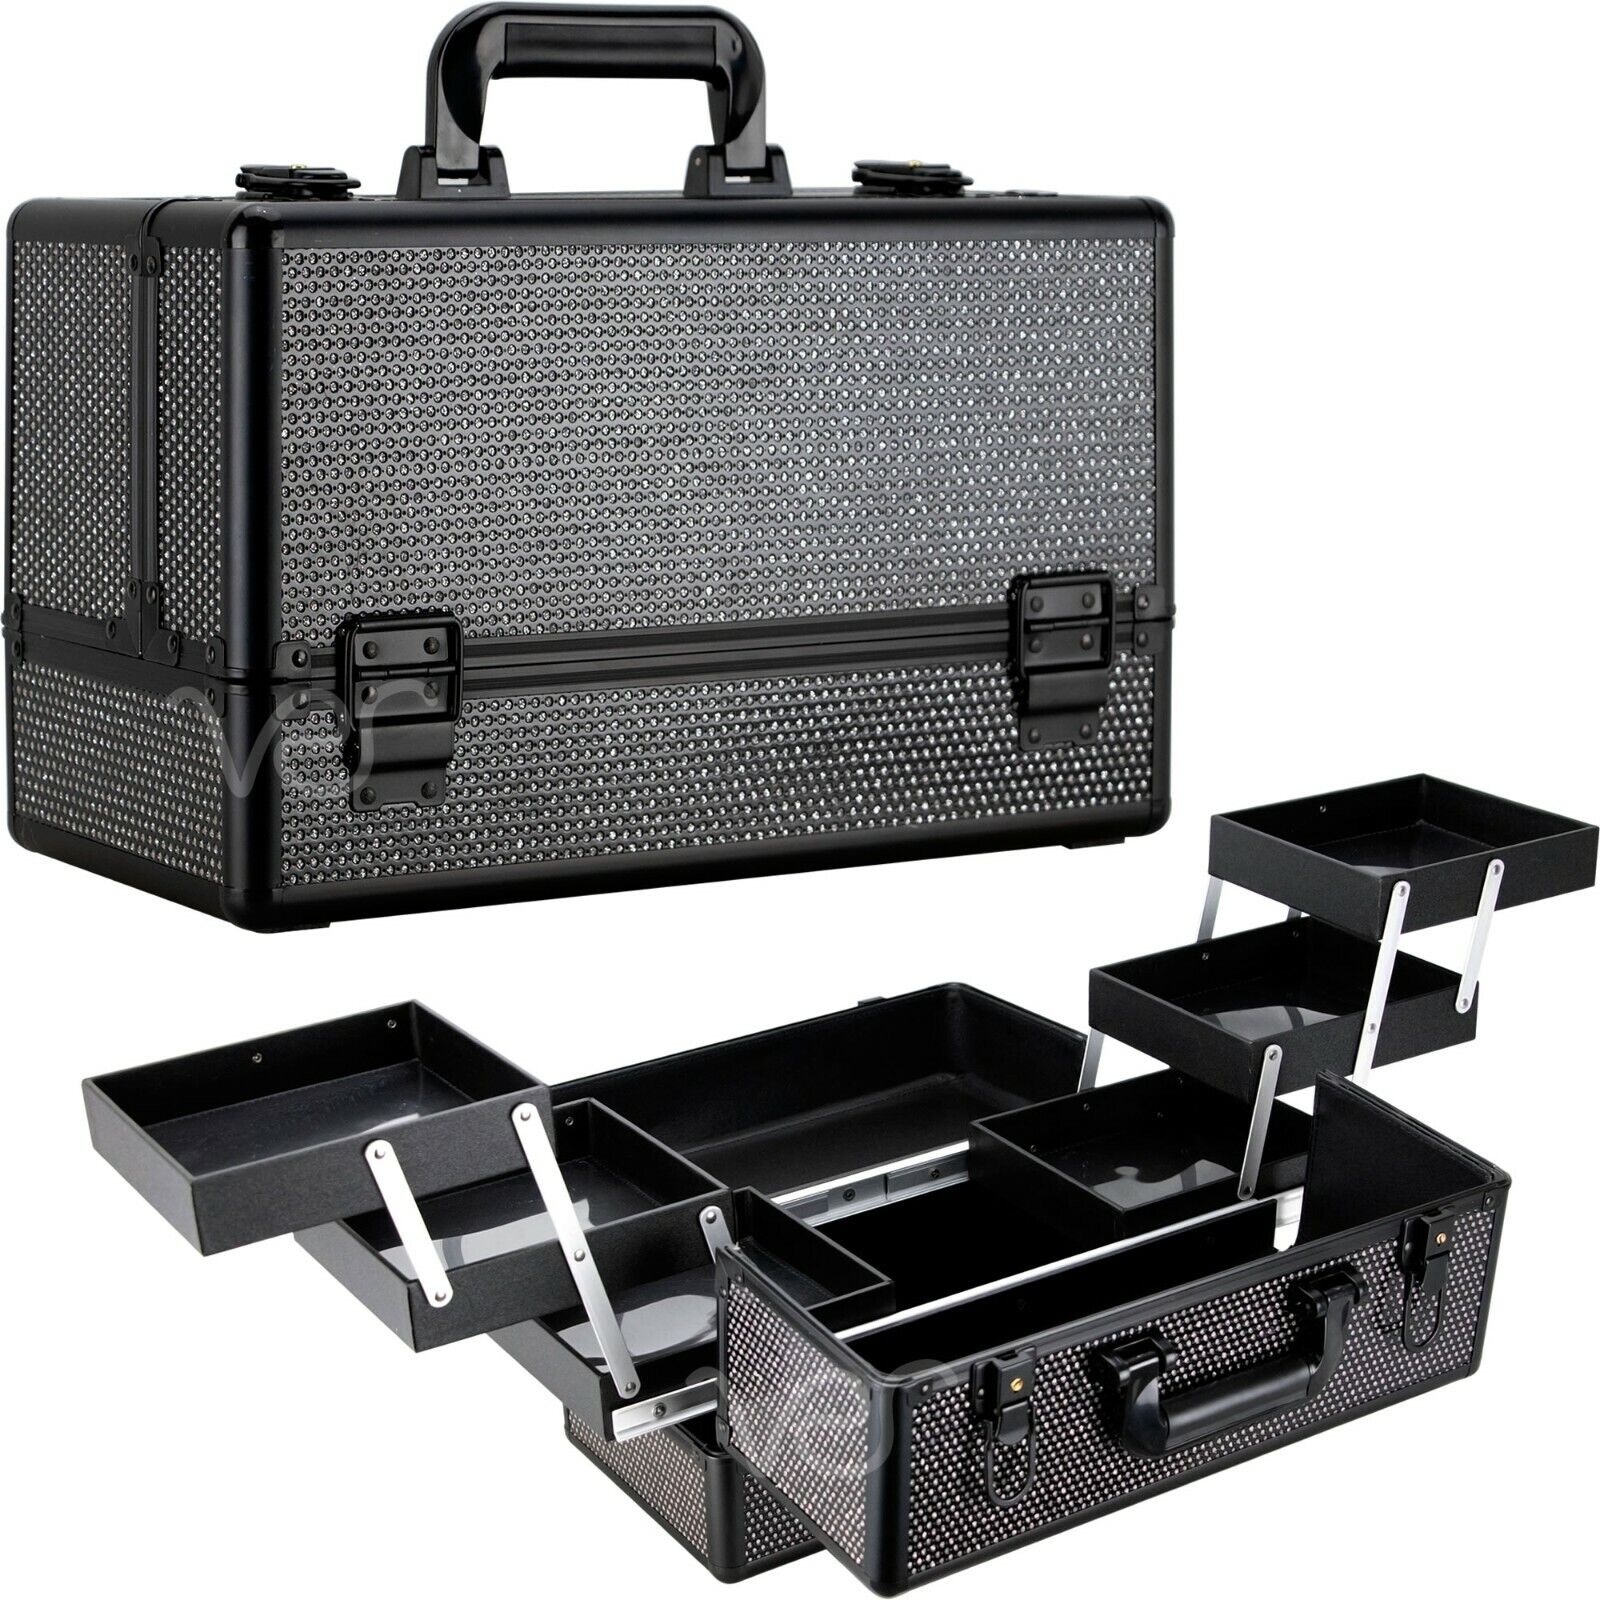 VER Beauty Professional Train Makeup Case with 6 Extendable Trays, Key locks